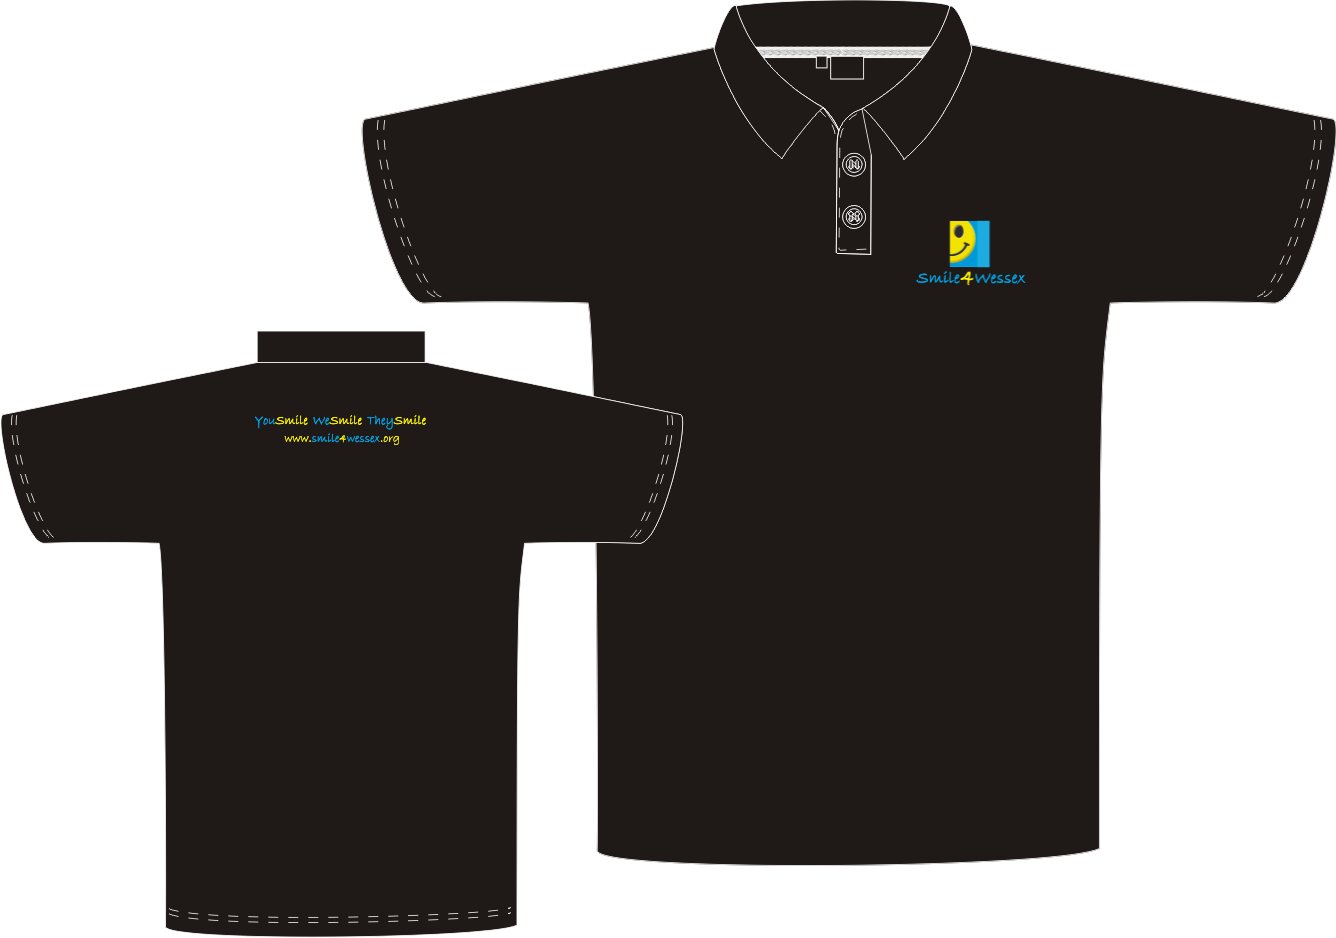 Stylish Henbury Polo Shirts with classic 3-
button collars, cuffed sleeves and plain hem.
Material - 65% Polyester 35% Cotton Pique
(200gsm). Embroidered Logo/Text.

Please allow 14 days for manufacture & delivery

Postage Included